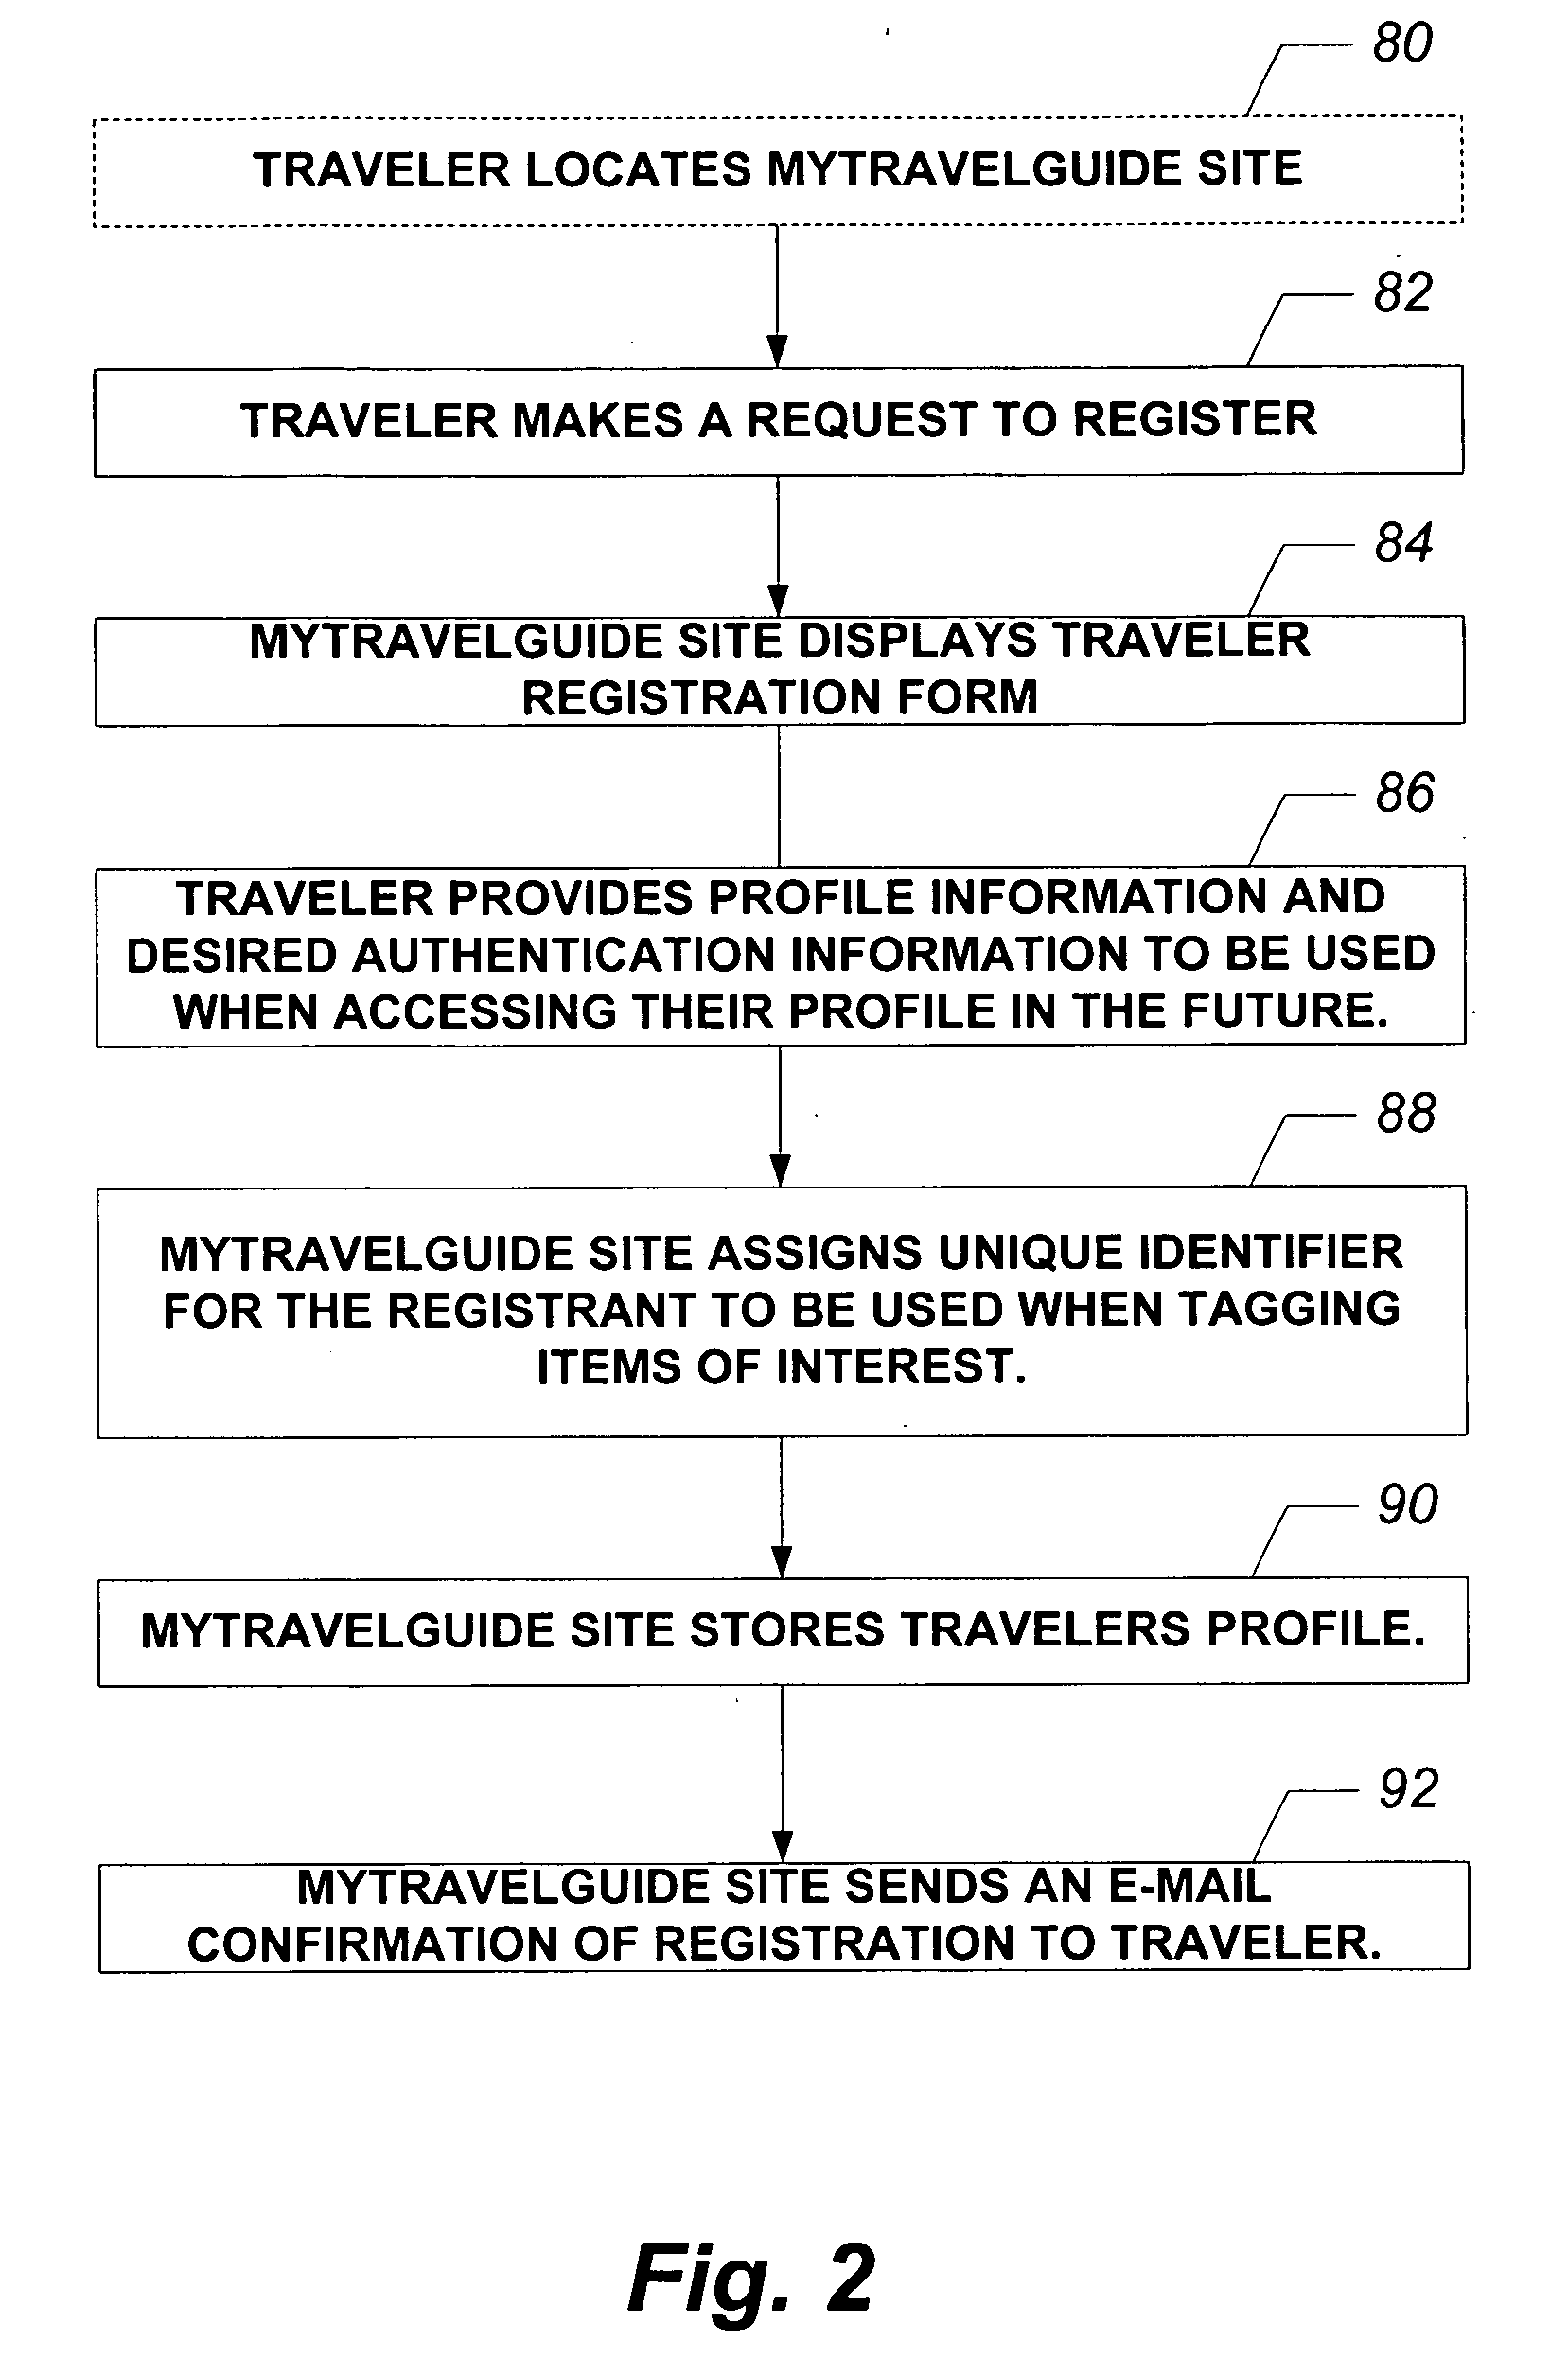 System and method for providing customized travel guides and itineraries over a distributed network